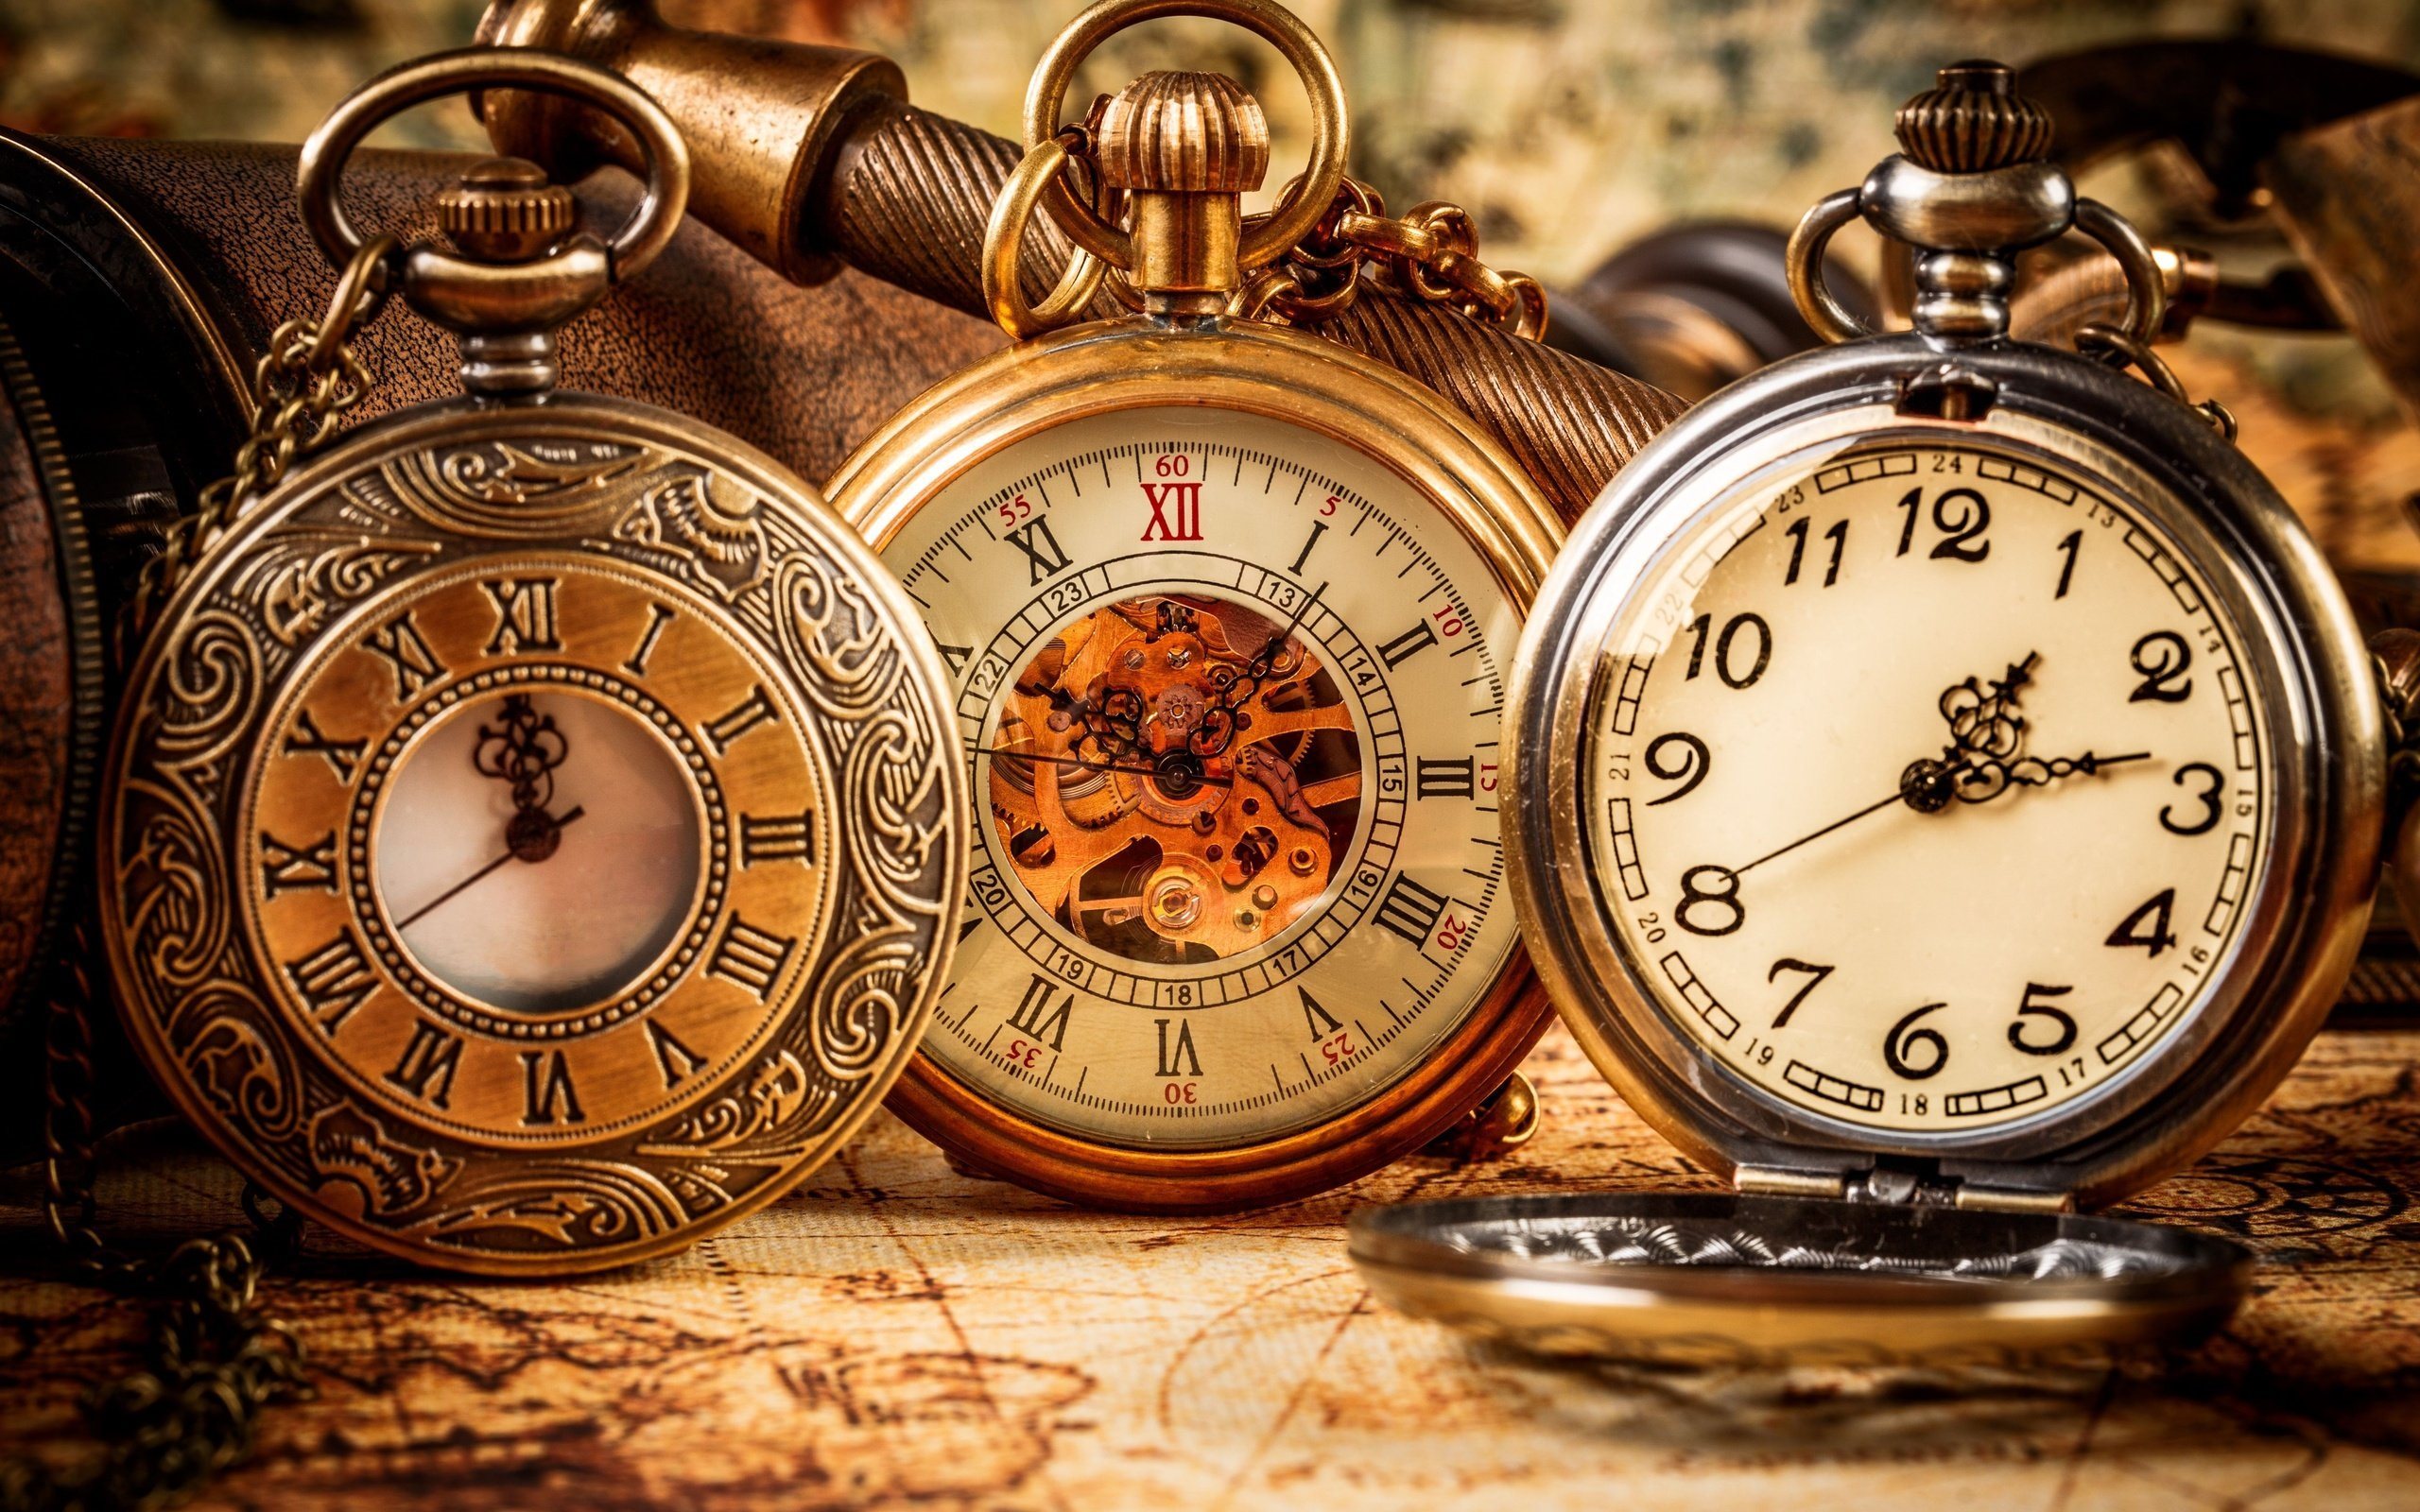 Old Clock, Old Pocket Watch, Time, Gold Watch, Antique - Papel De Parede Relógio - HD Wallpaper 